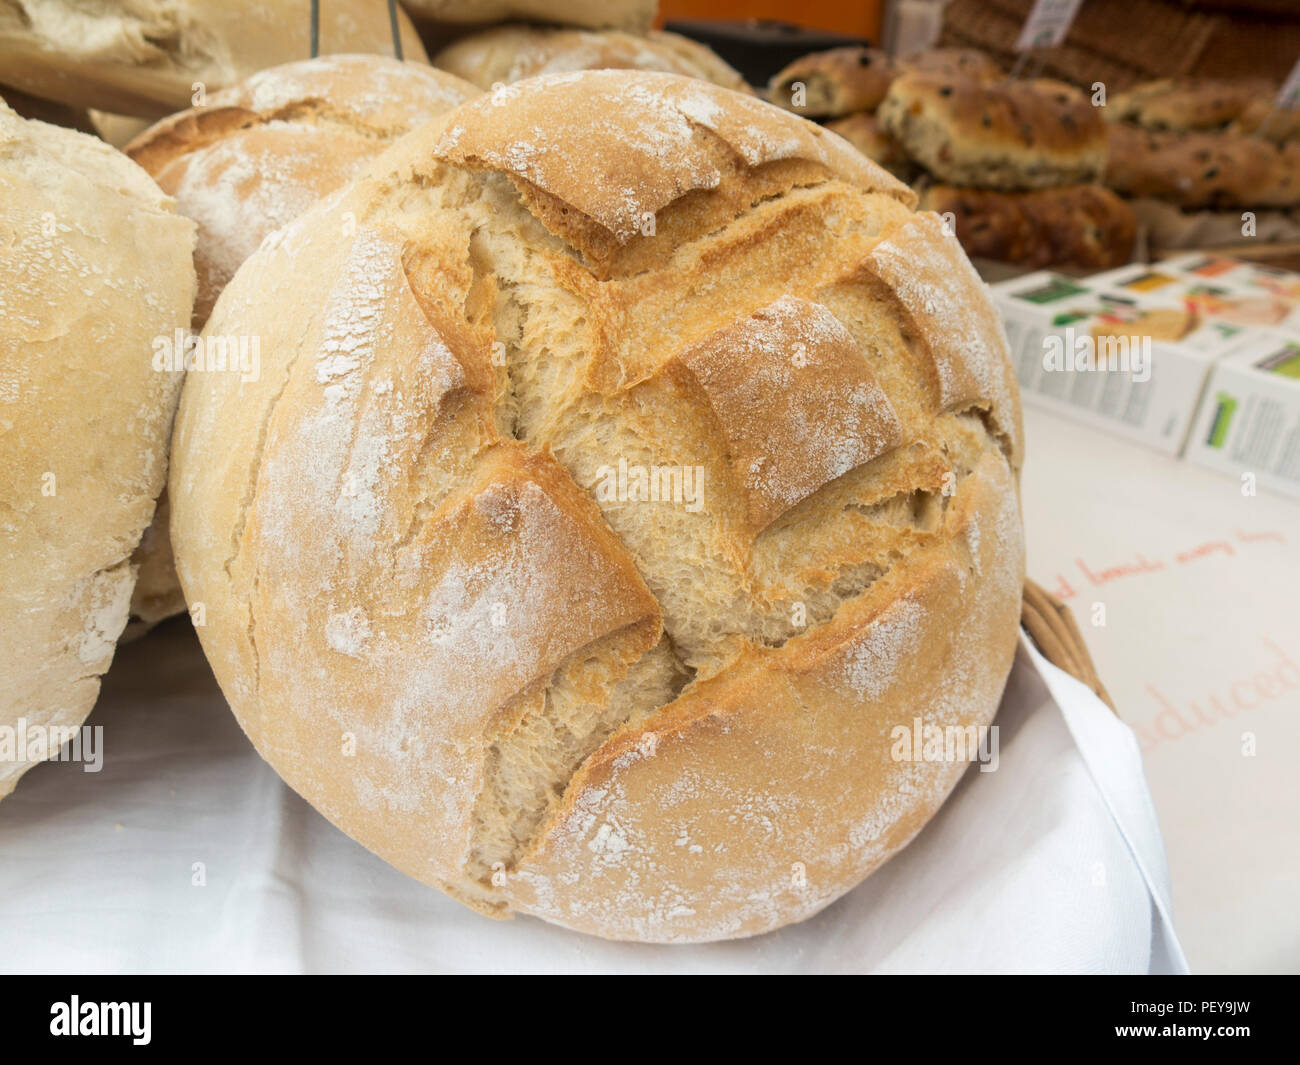 Round loaf of bread Stock Photo